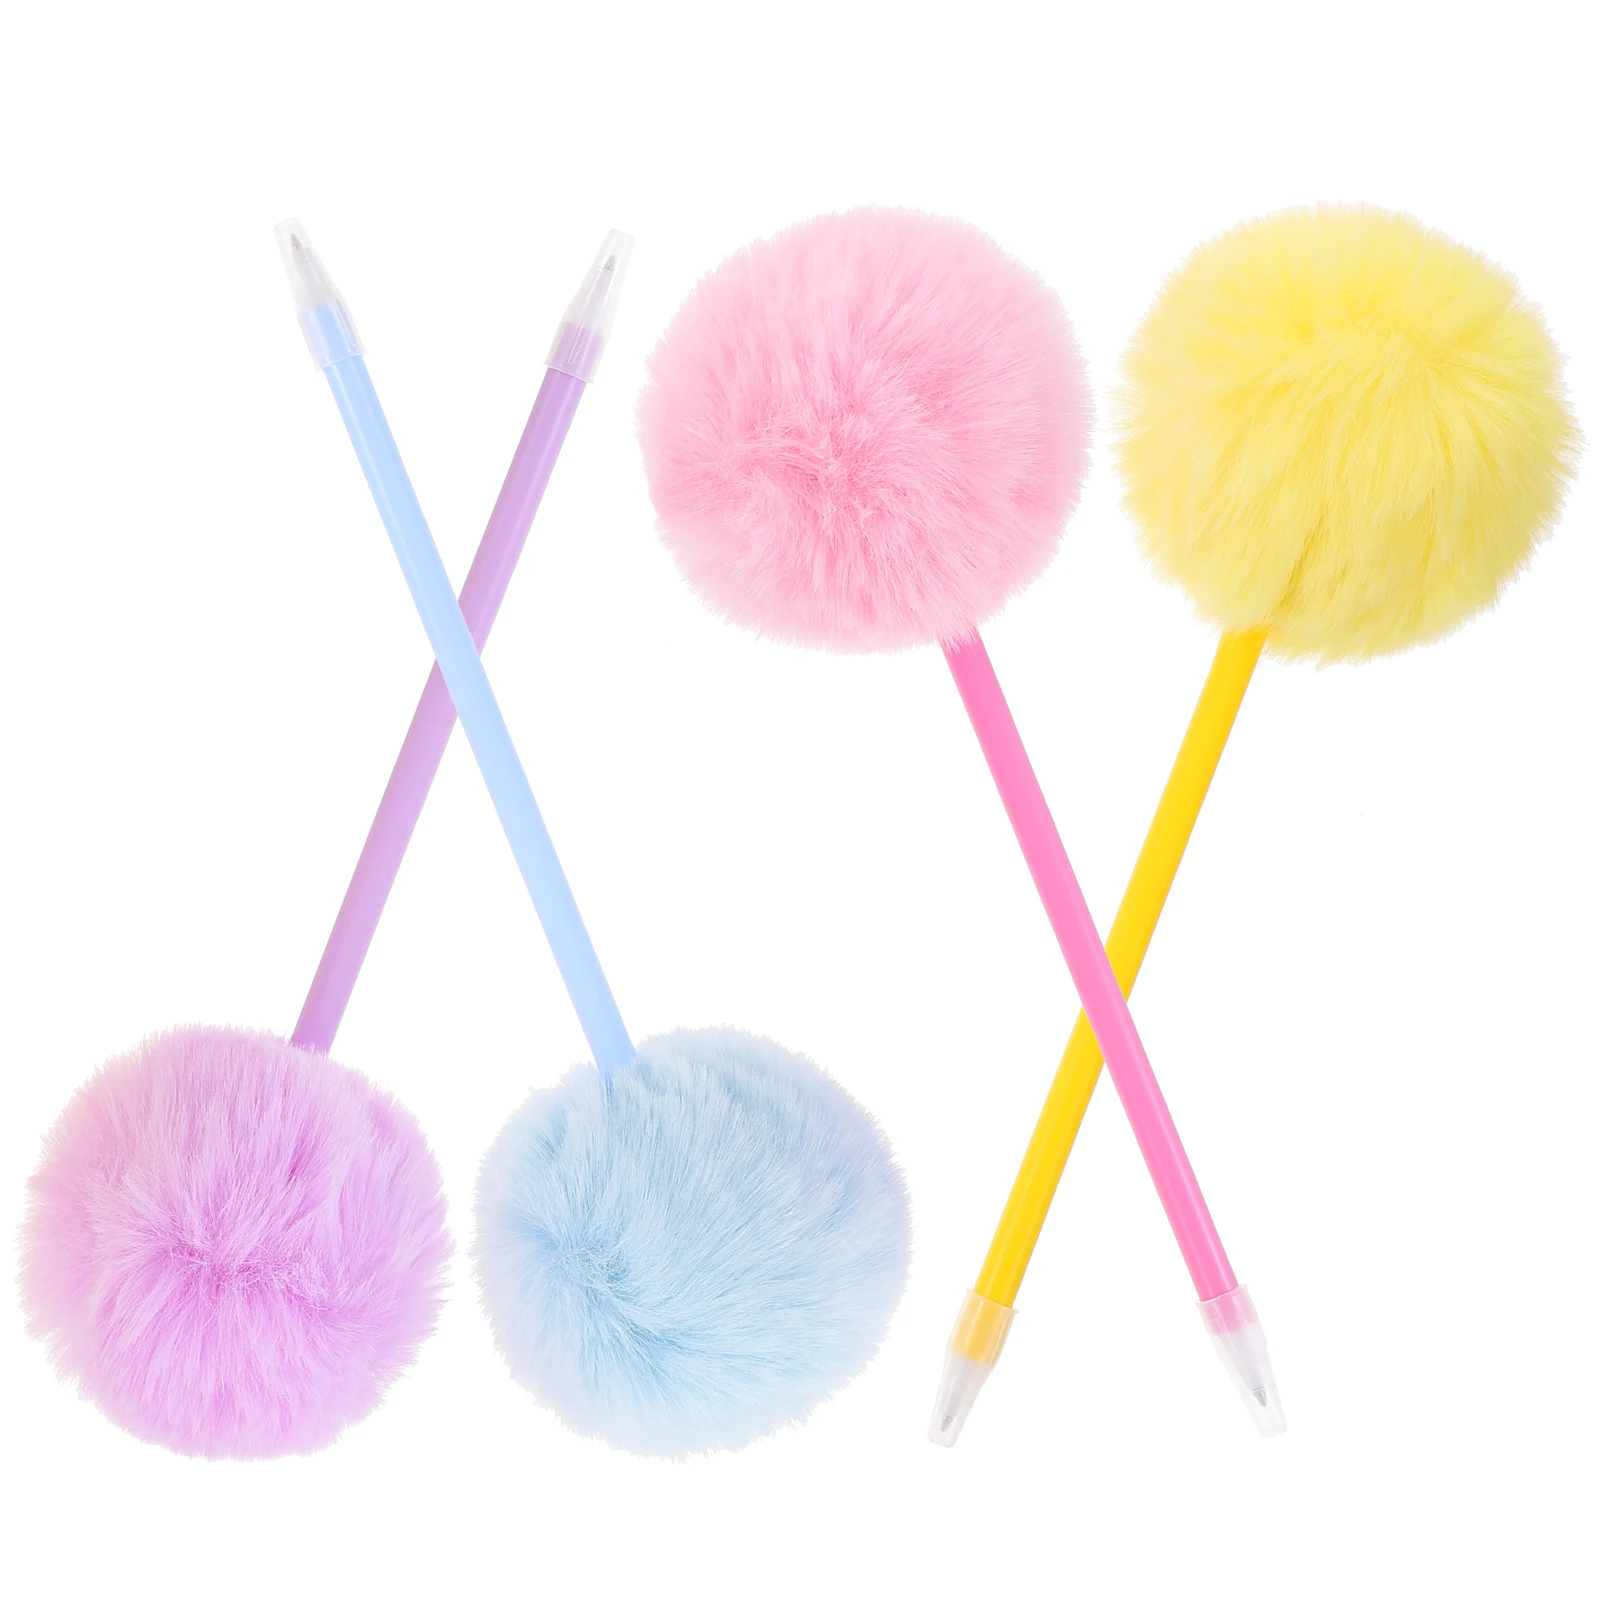 4 Pcs Hair Ball Writing Pen Ballpoint Pens Pompom Fluffy Cute Lovely for Cartoon Cute Pp Decorative Student Girls purple rabbit hair chicken spacing pen ancient chinese calligraphy brush pen traditional chinese painting brush writing brushes